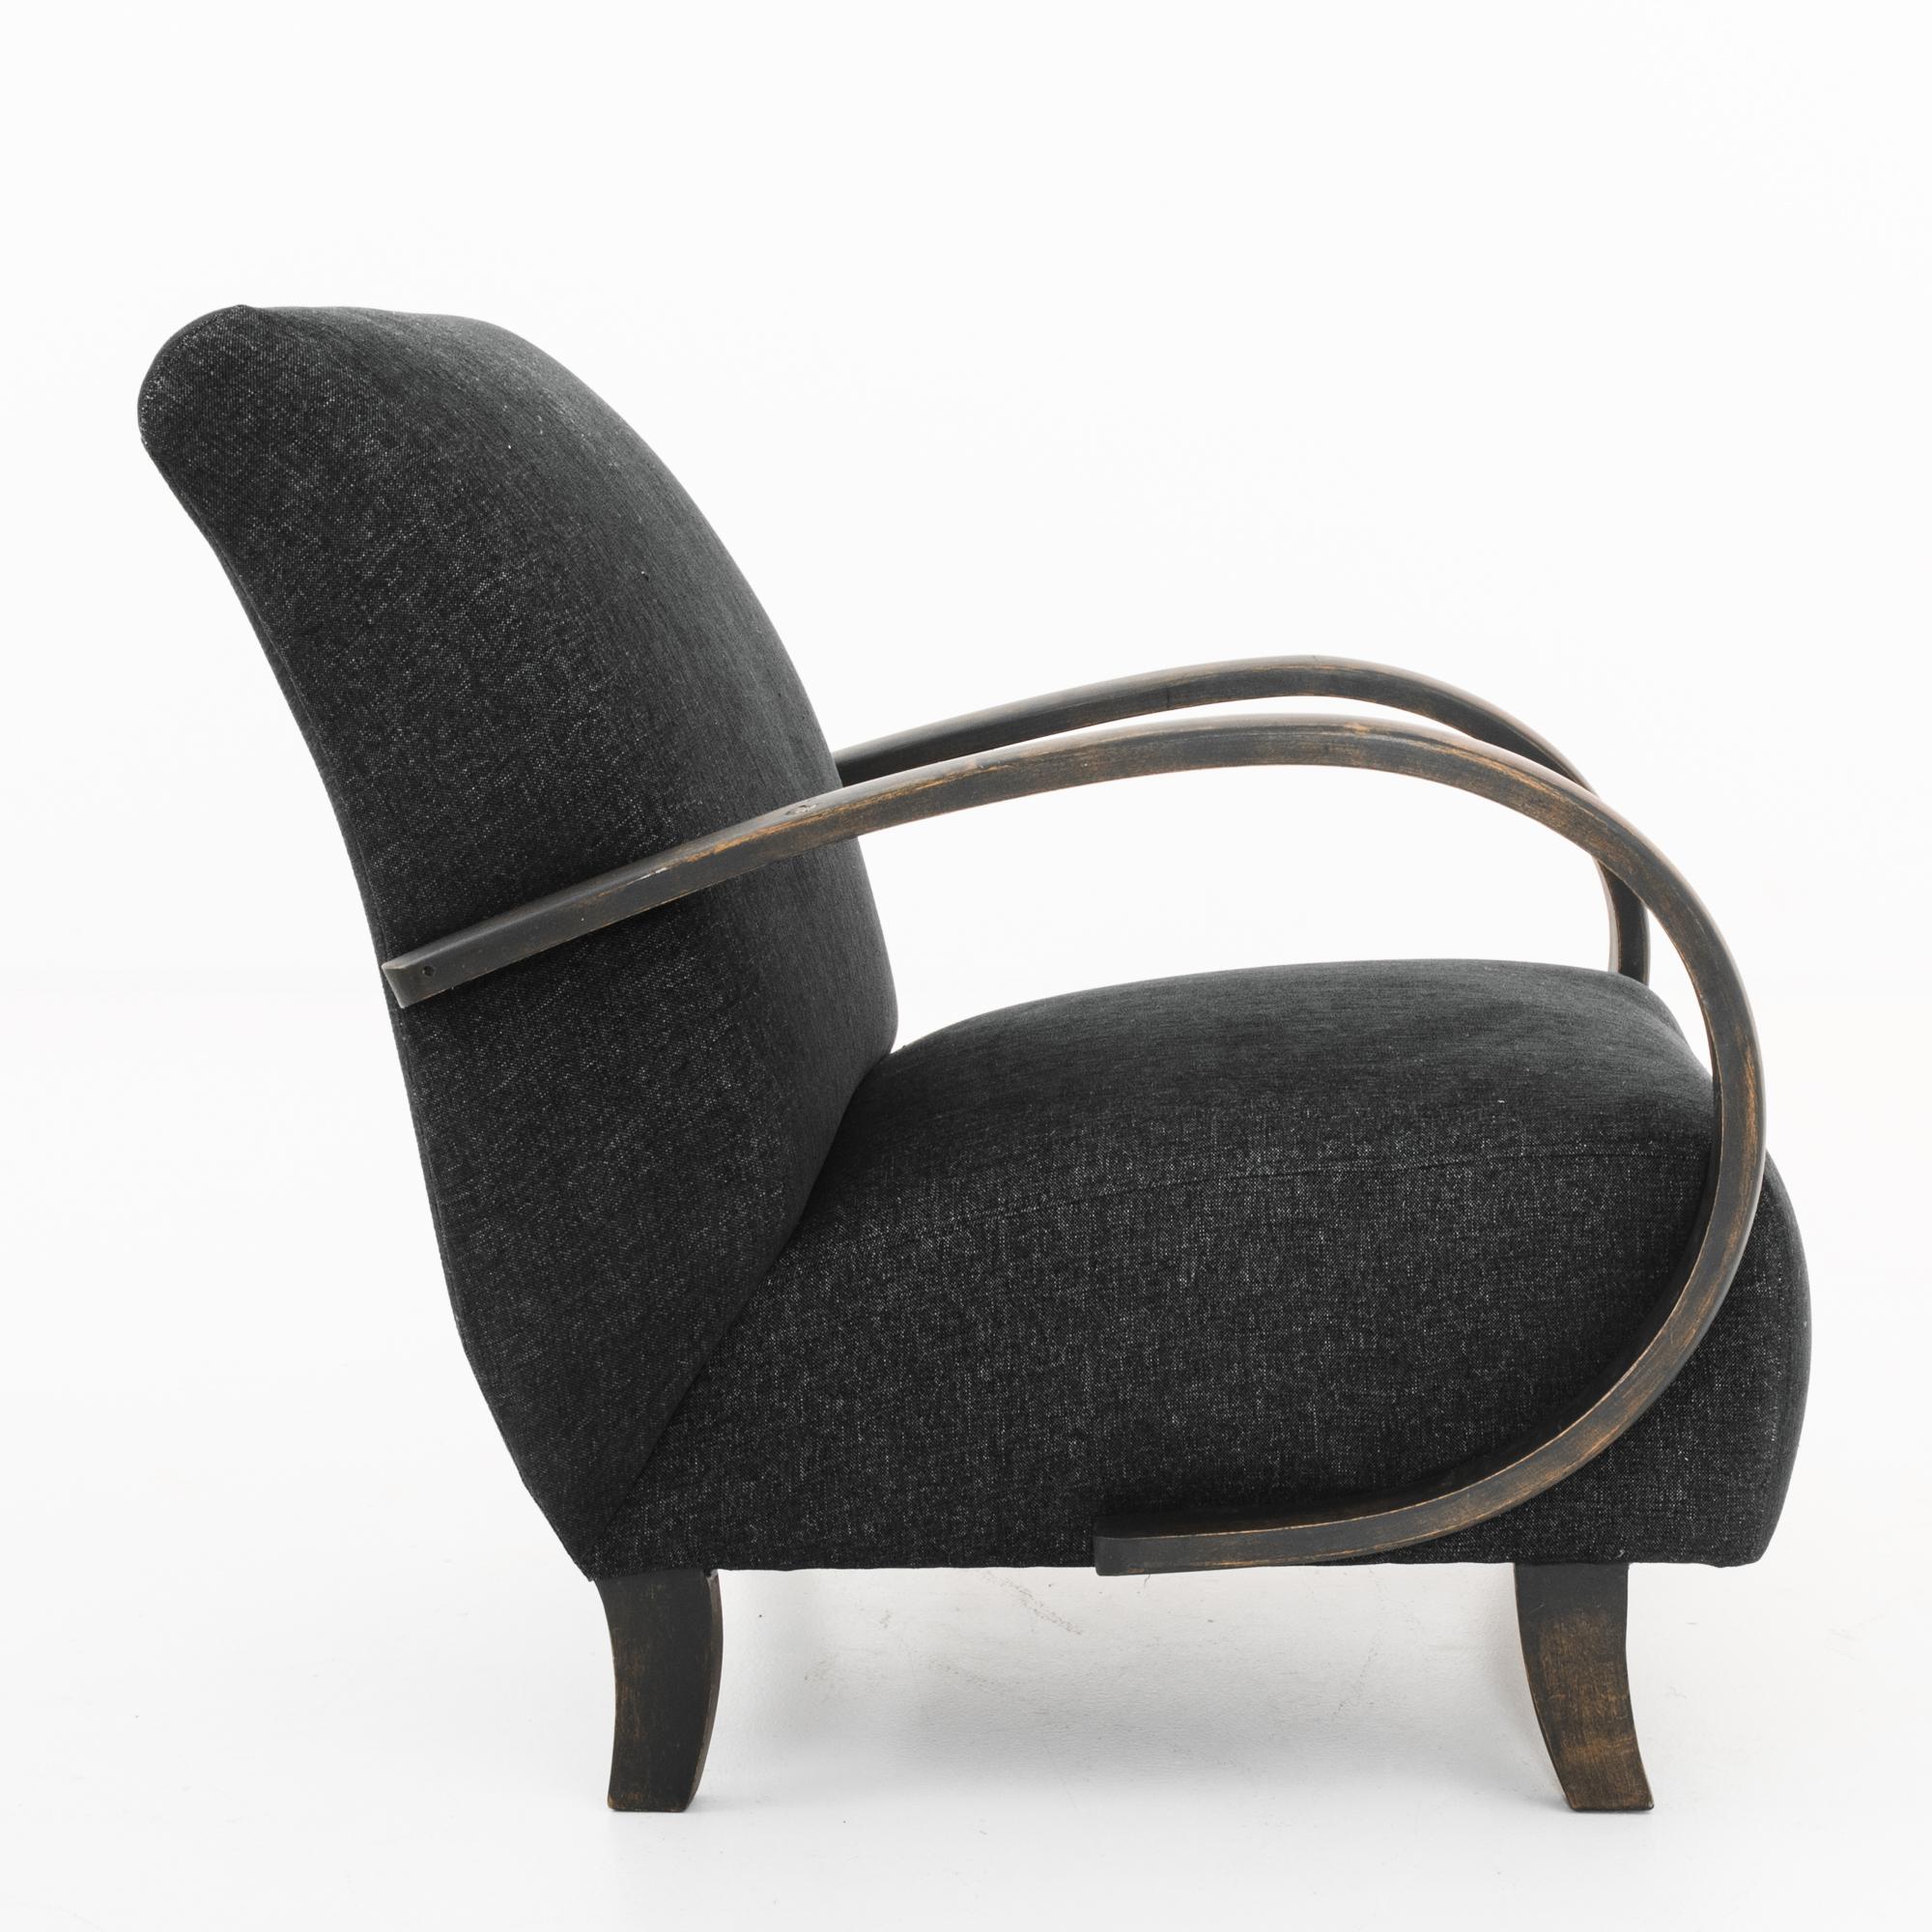 Mid-Century Modern upholstered armchair made in the former Czechoslovakia, circa 1960. A timeless approach that still looks contemporary and fresh. Designed by the modernist Jindrich Halabala, these armchairs feature his signature bent beech